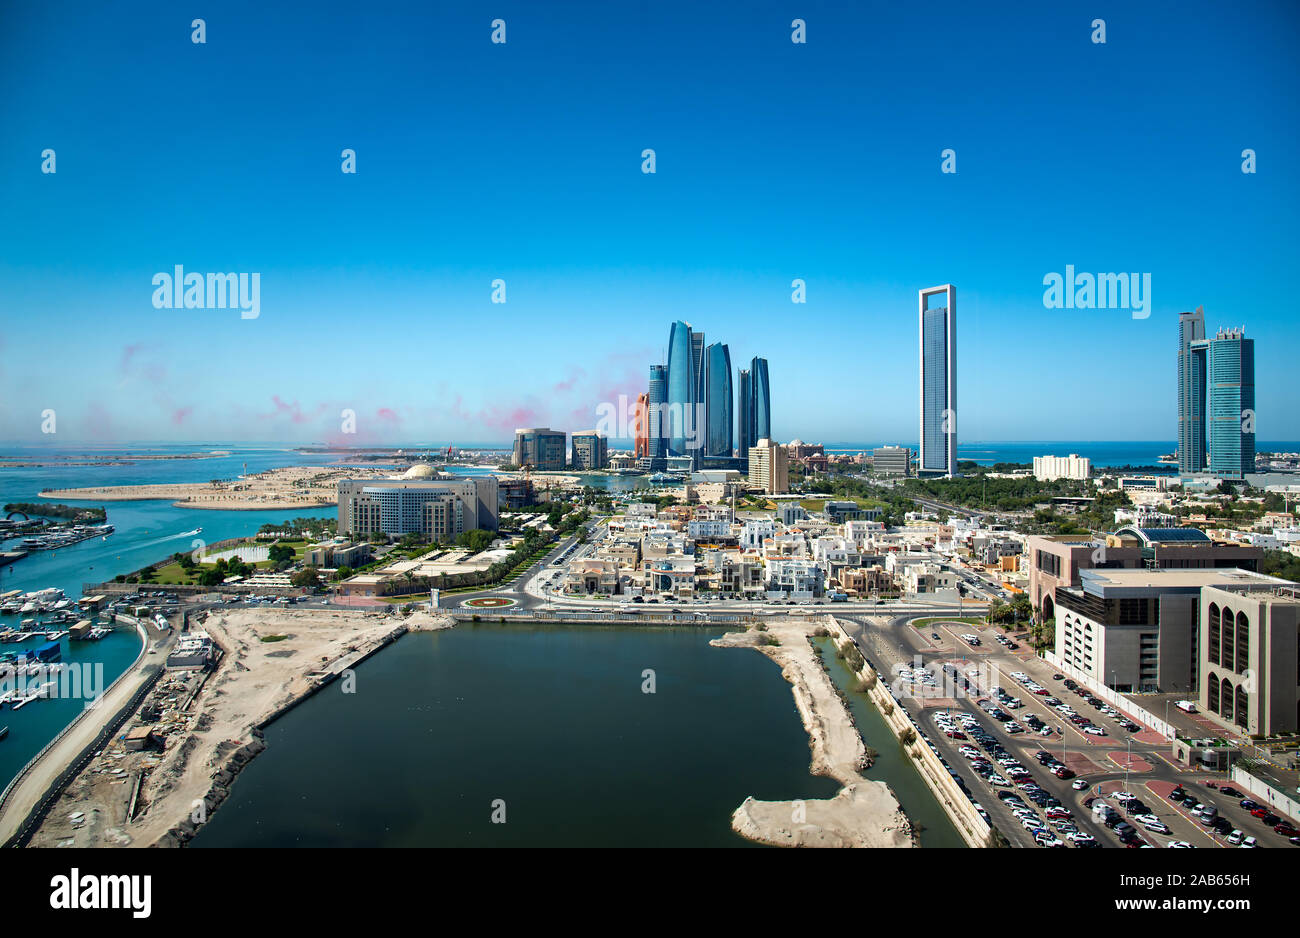 Abu Dhabi skyline with air show colors in the sky and view of the downtown modern buildings of the UAE capito Stock Photo